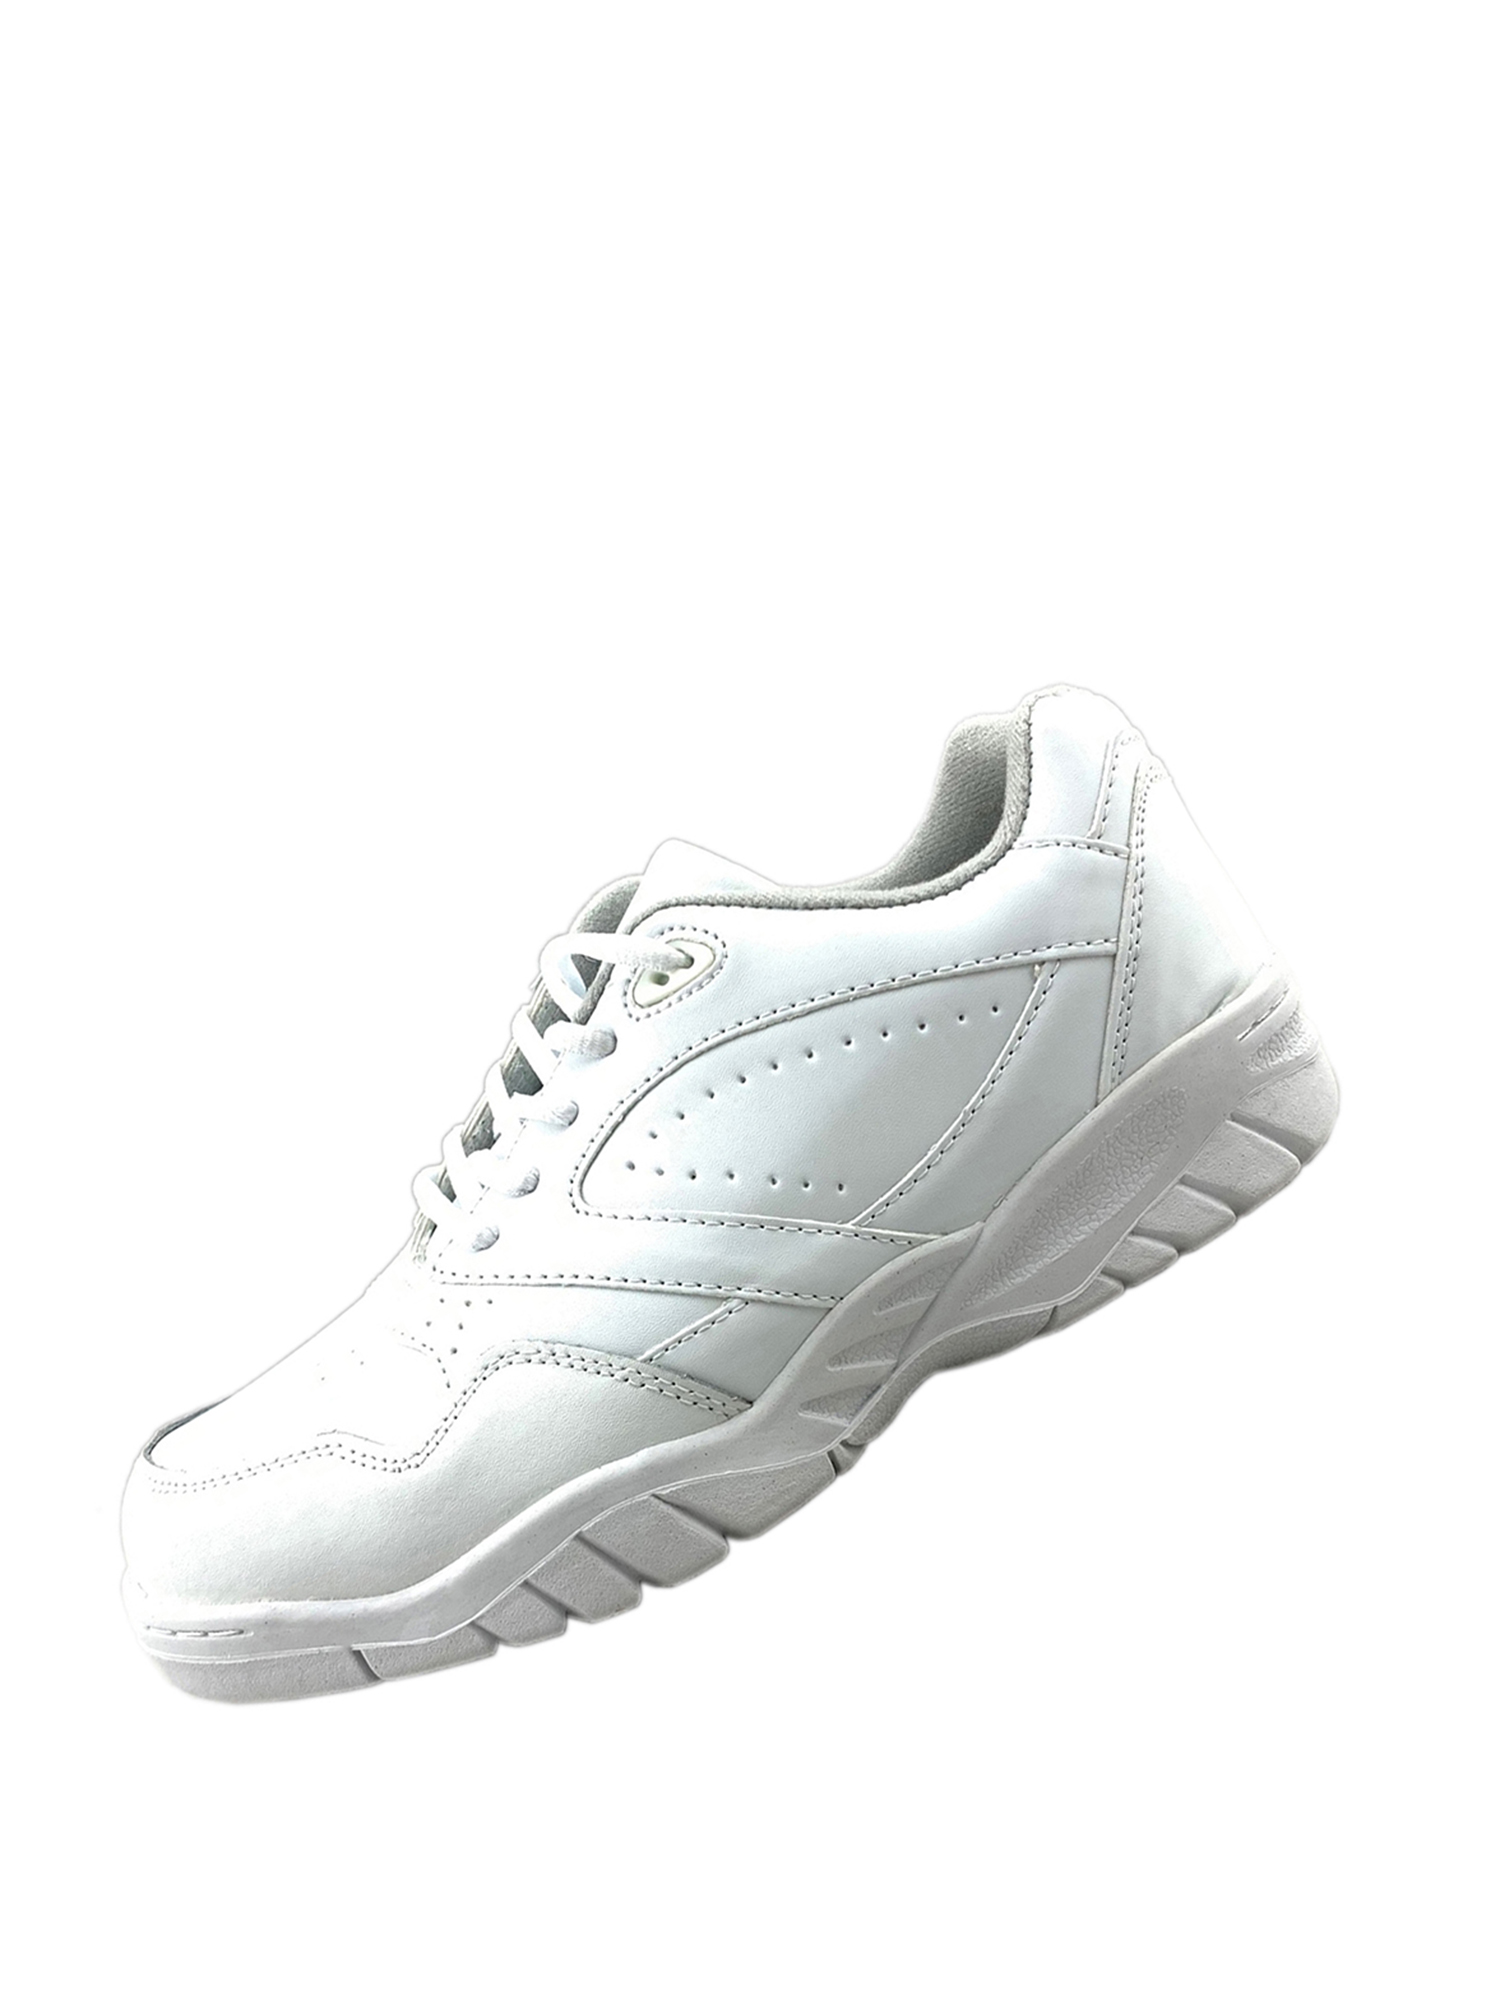 Tanleewa Men's Leather Sneakers Non-Slip Sports Shoes Lightweight Tennis Shoe Size 12 - image 1 of 5